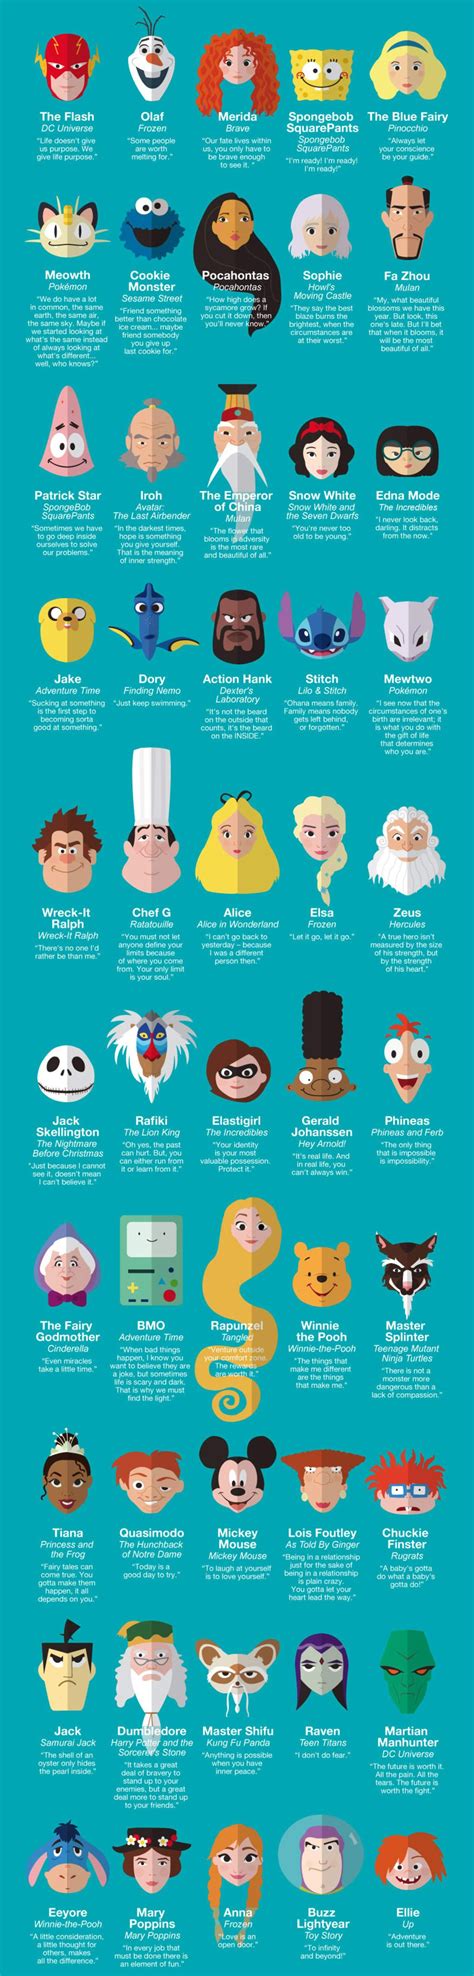 50 Inspiring Life Quotes From Famous Cartoon Characters Cartoon